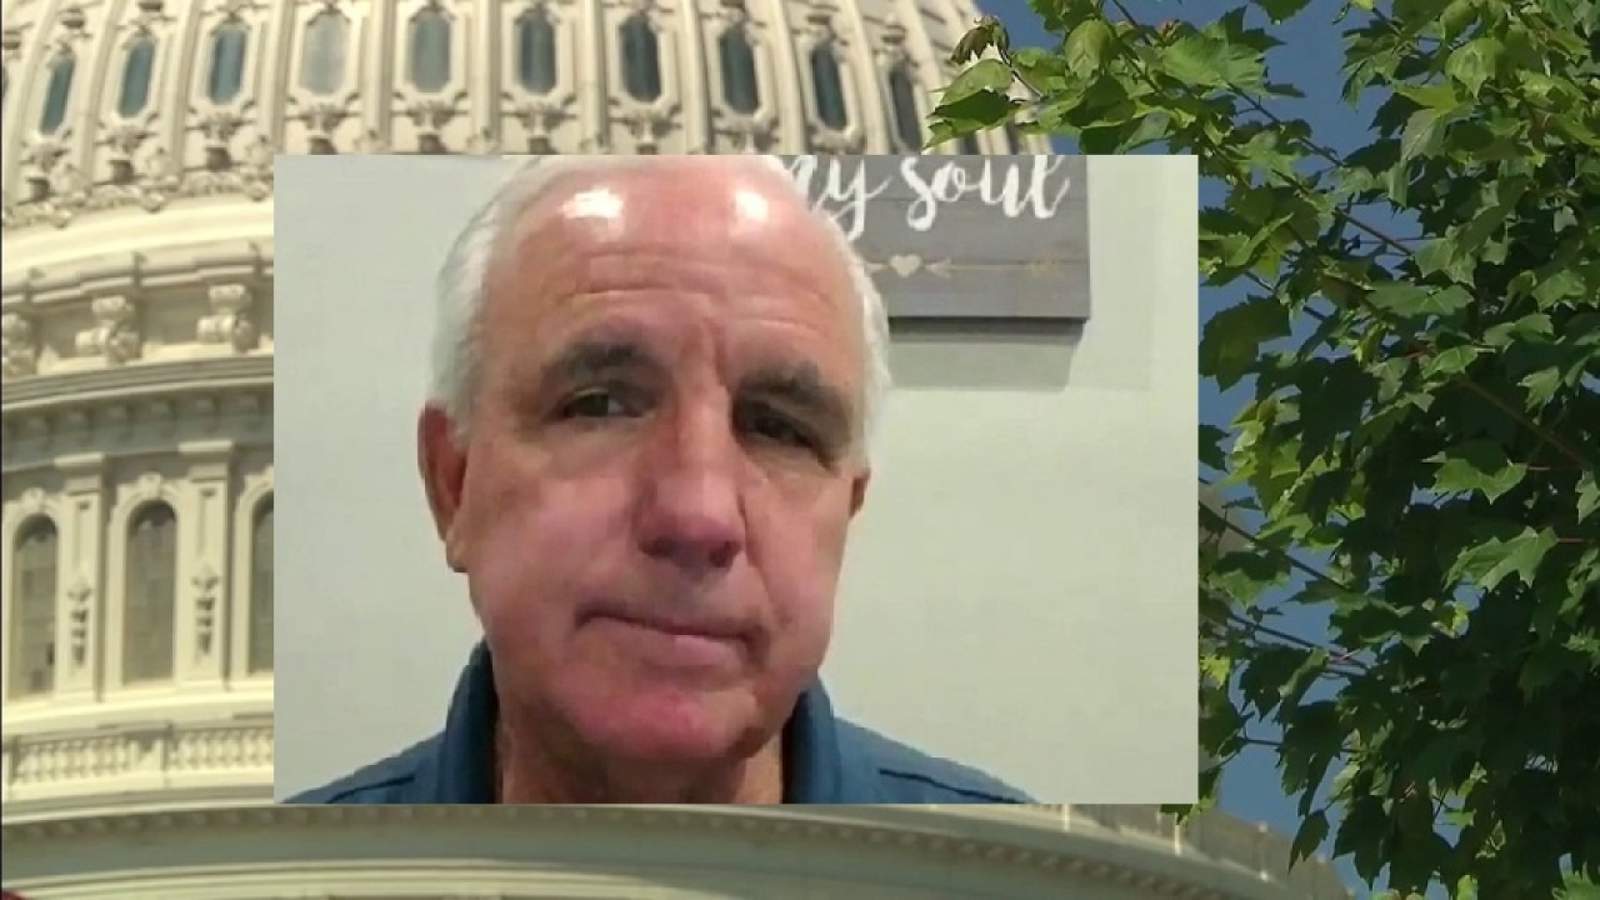 Former Miami-Dade mayor, now GOP congressman says he’ll vote with ‘conscience’ Jan. 6